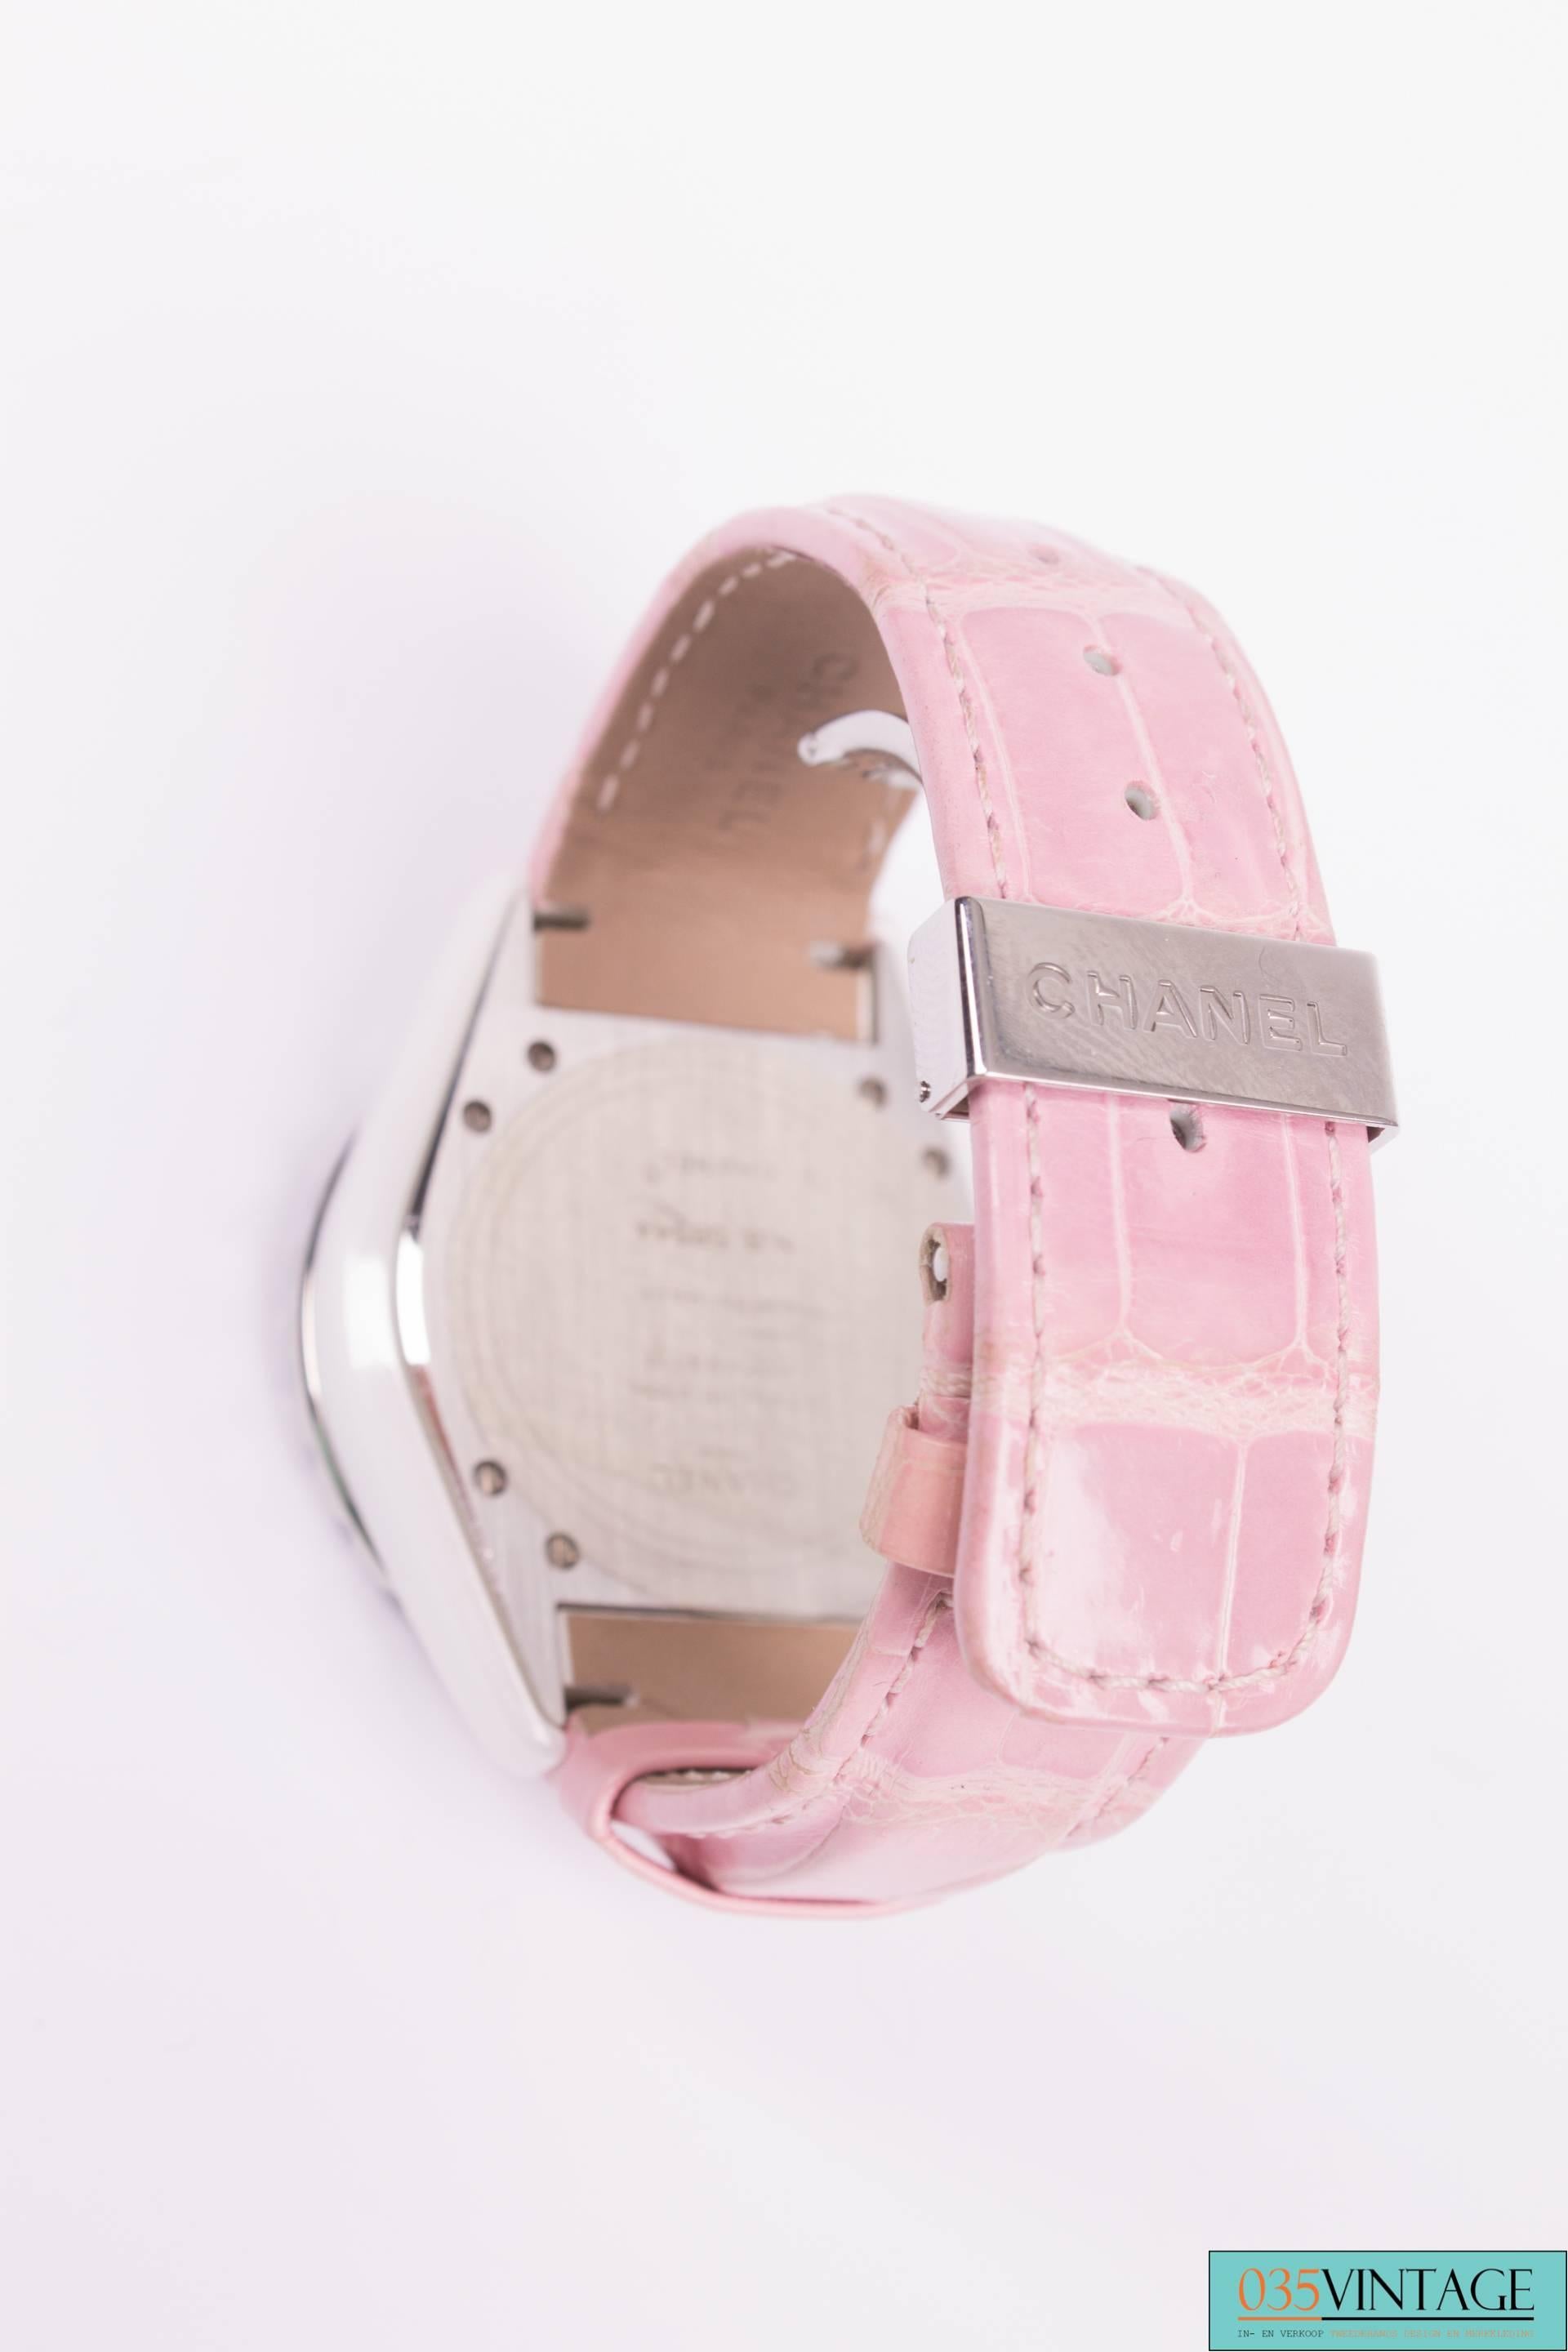 A watch made by Chanel with circular dial and pink sapphire set bezel, this is the J12.

The dial in white with black characters and date aperture. Ceramic and stainless steel case, the diameter is 4 centimeters. A pink alligator strap with silver